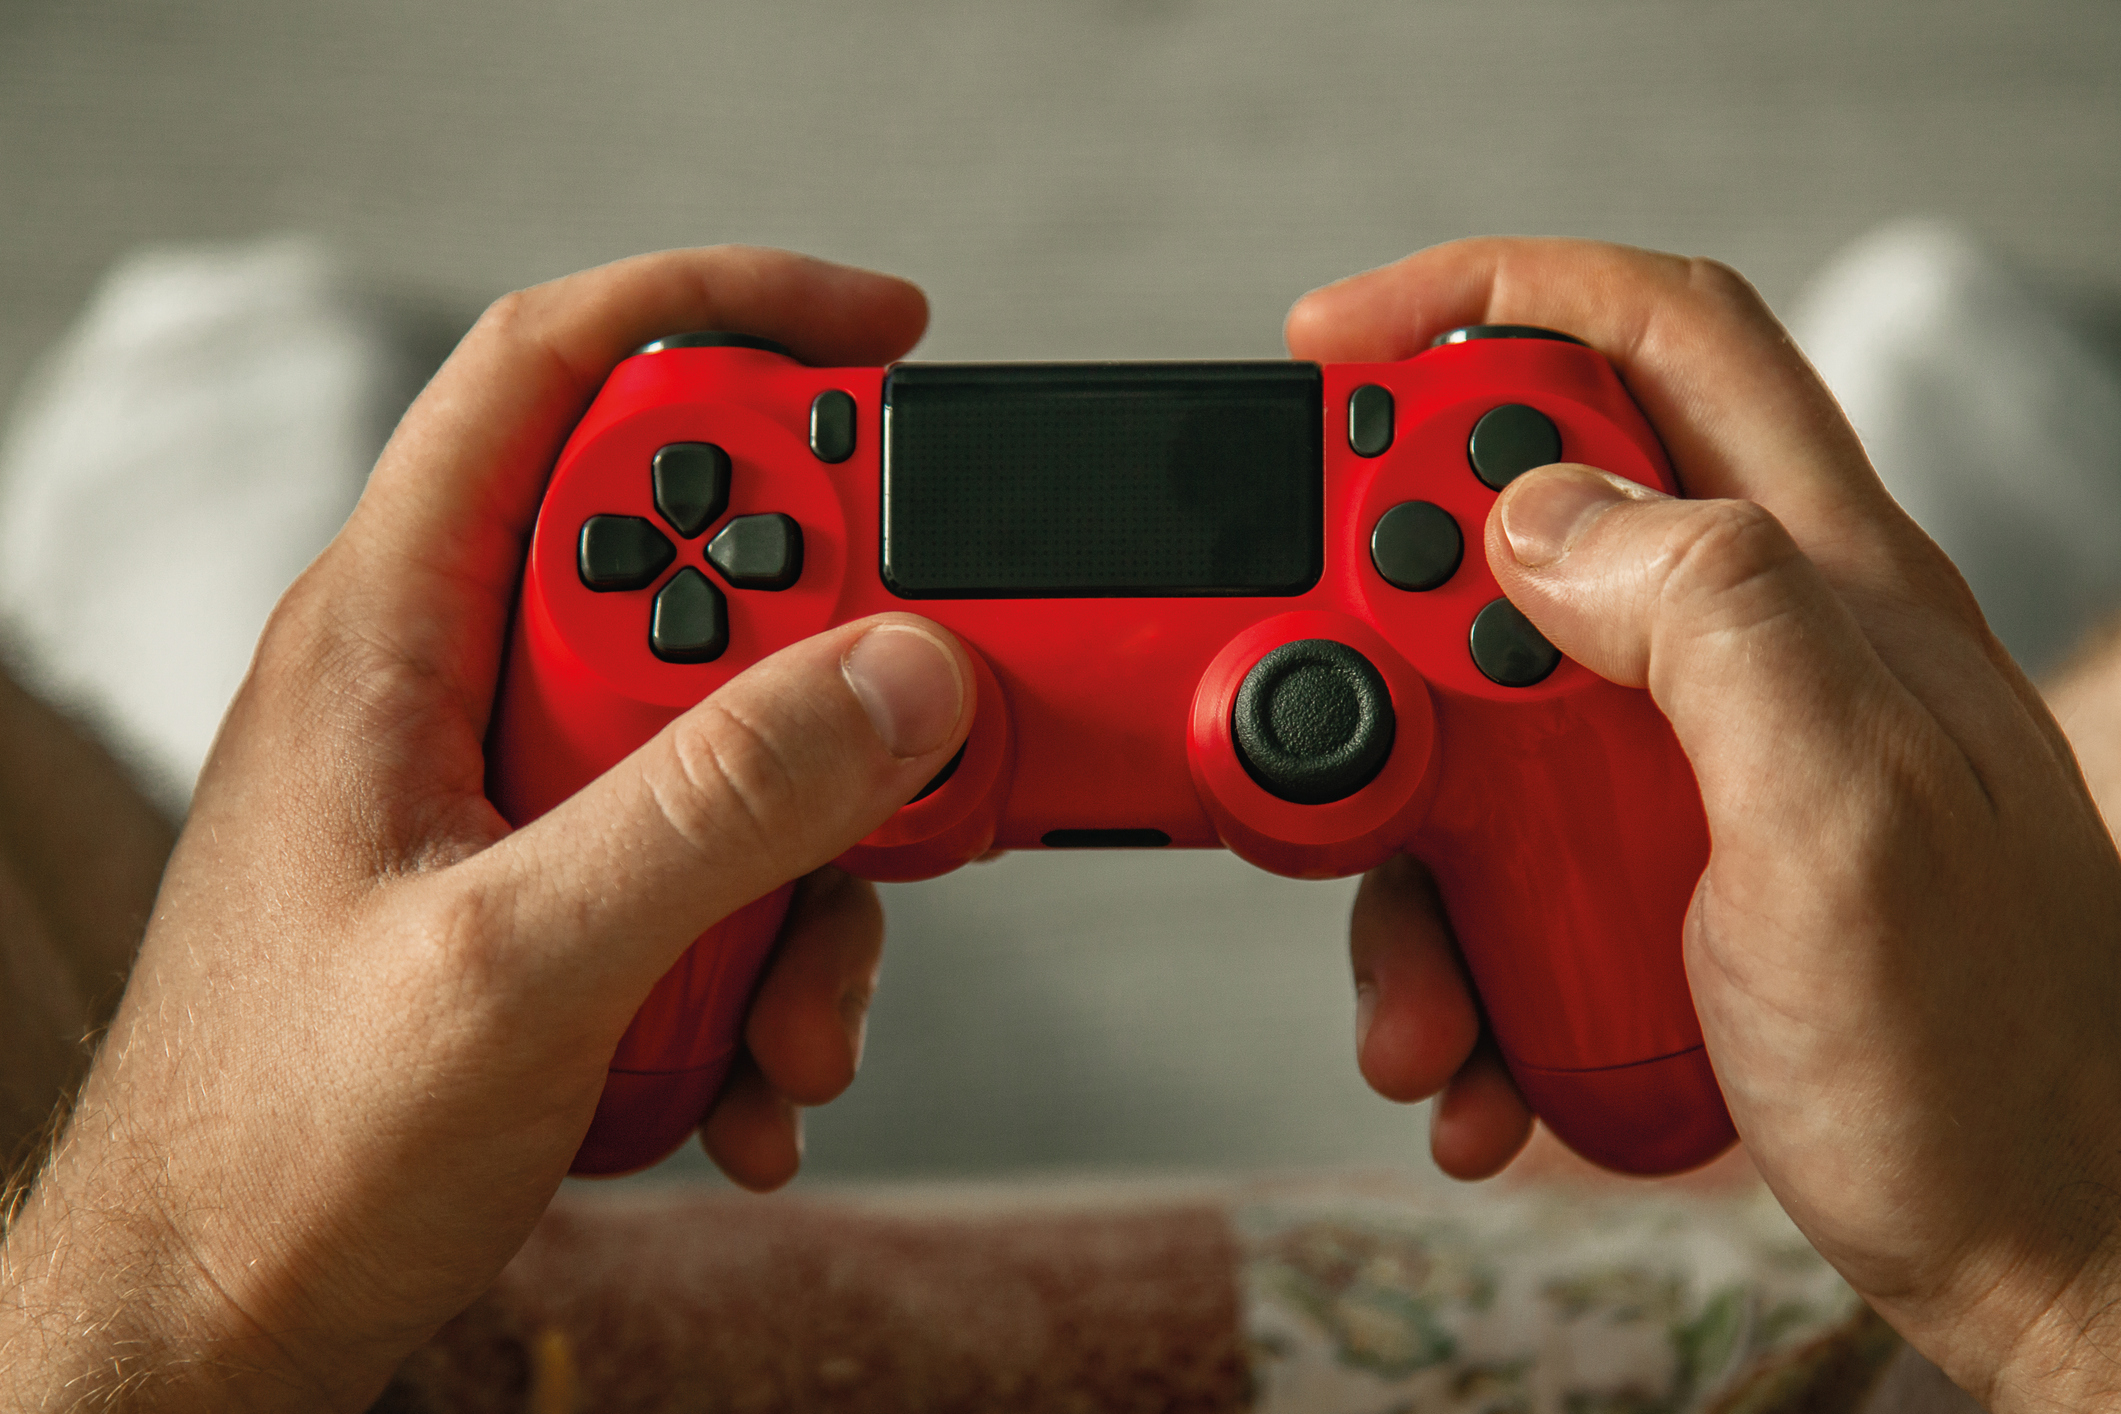 A person holding a red game controller, focused on gameplay, representing leisure time in relationships